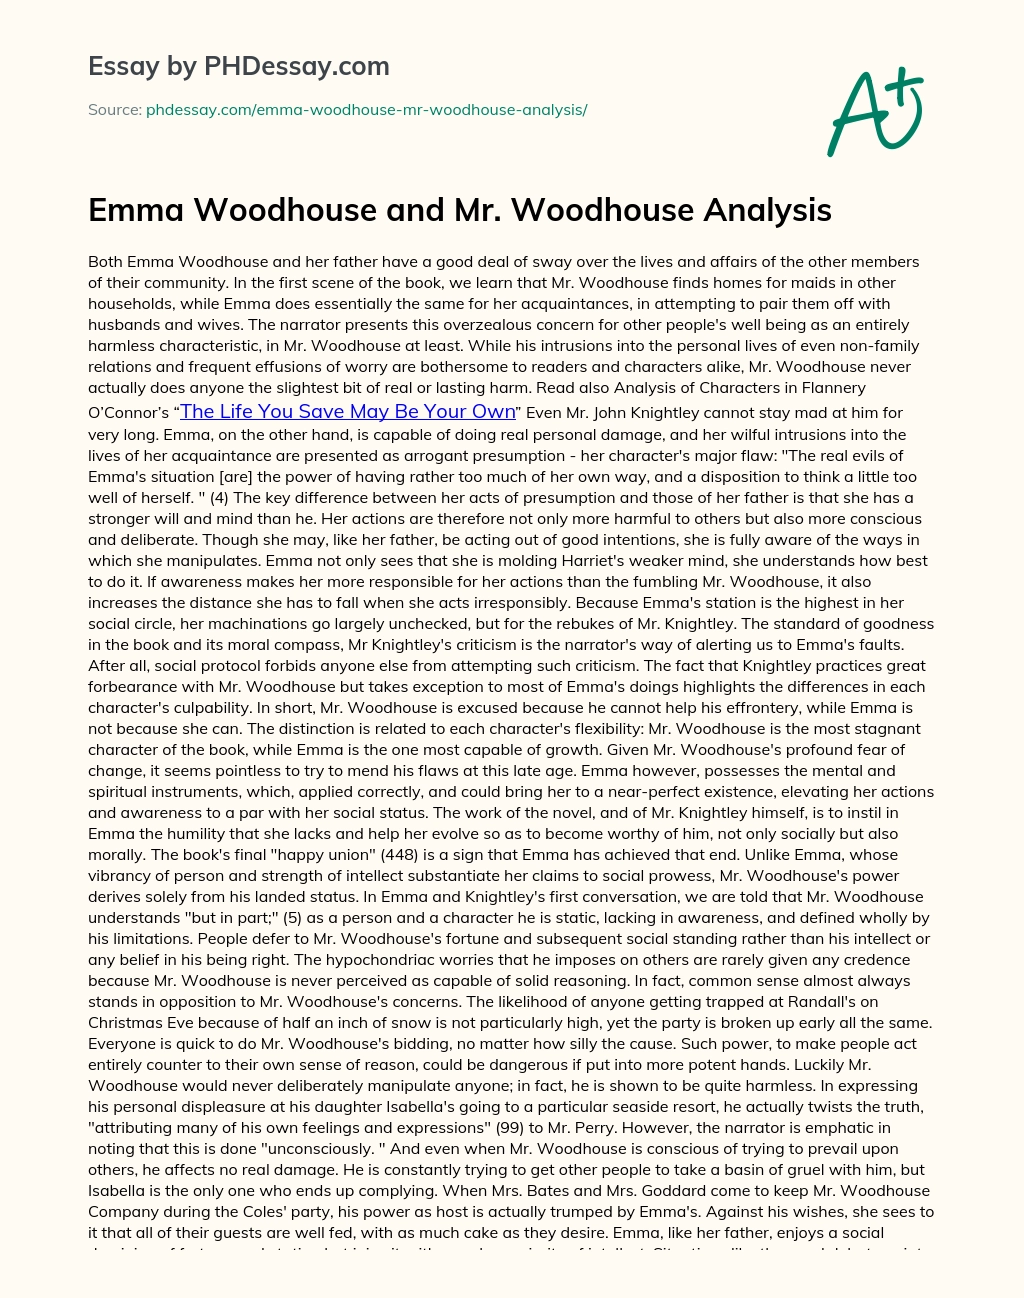 Emma Woodhouse and Mr. Woodhouse Analysis essay